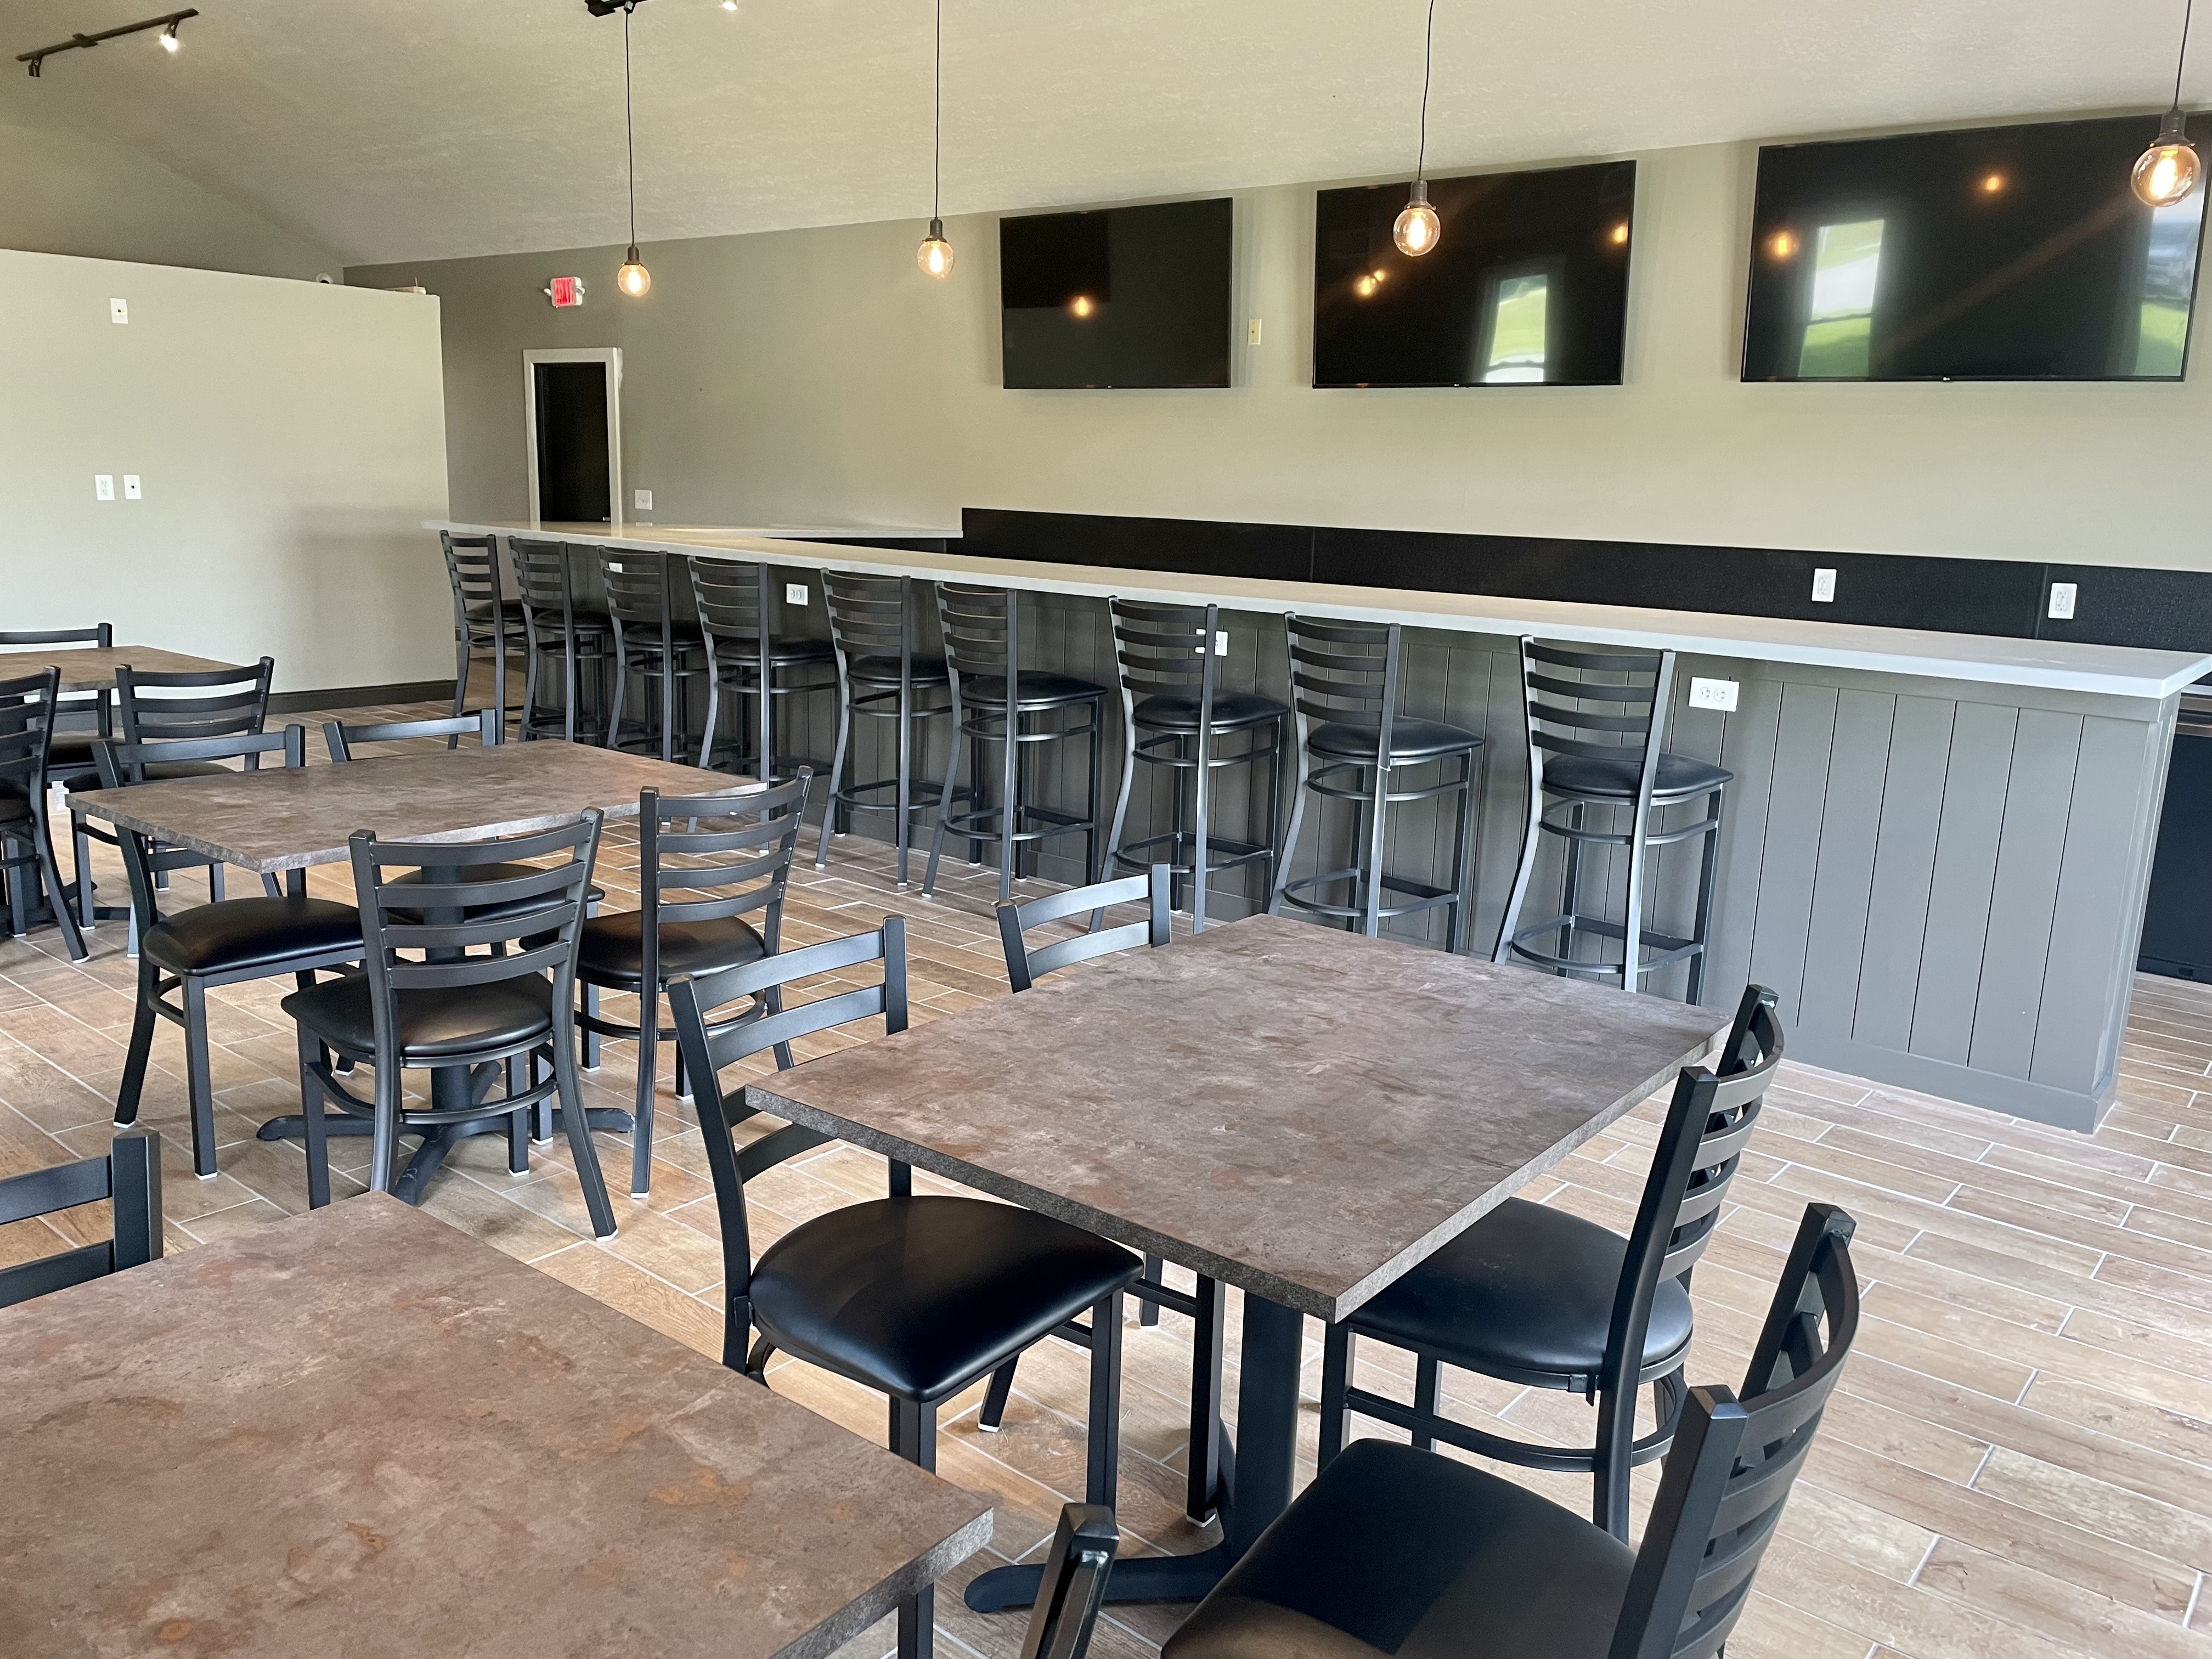 Jasper Kitchen + Bar, a new restaurant and bar offering brick oven fired pizza and much more, is expected to open to the public in July at the Jasper Hills Golf Club in Xenia.